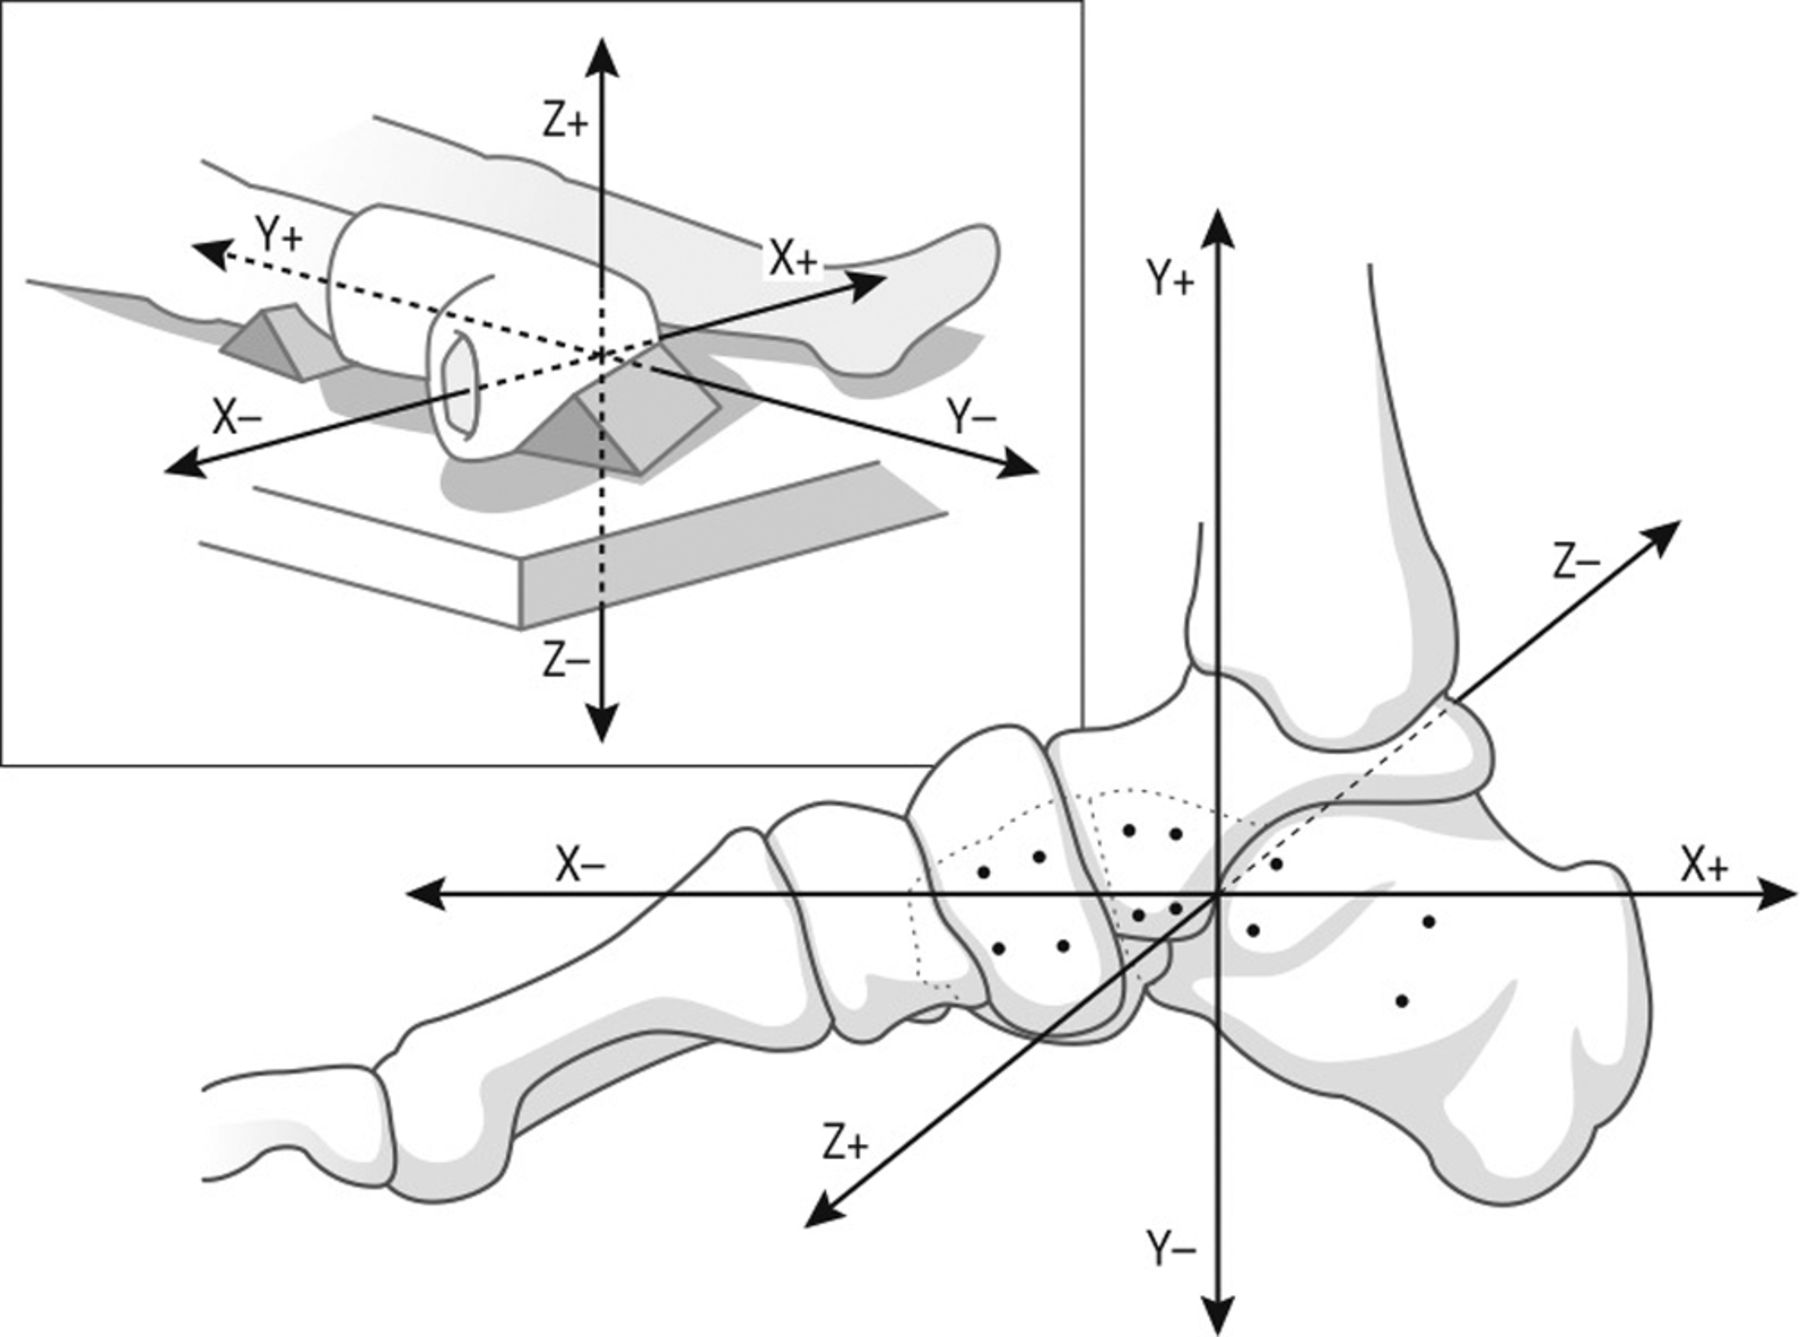 Fig. 2 
            Drawing illustrating the orientation
of the coordinate system relative to the anatomy of the foot. The
foot is viewed from the medial side, with the dotted lines representing
the contour of the distal part of both the calcaneal bone and the
cuboid bone. The drawing in the upper left corner illustrates the
positioning of the foot for future clinical studies.
          